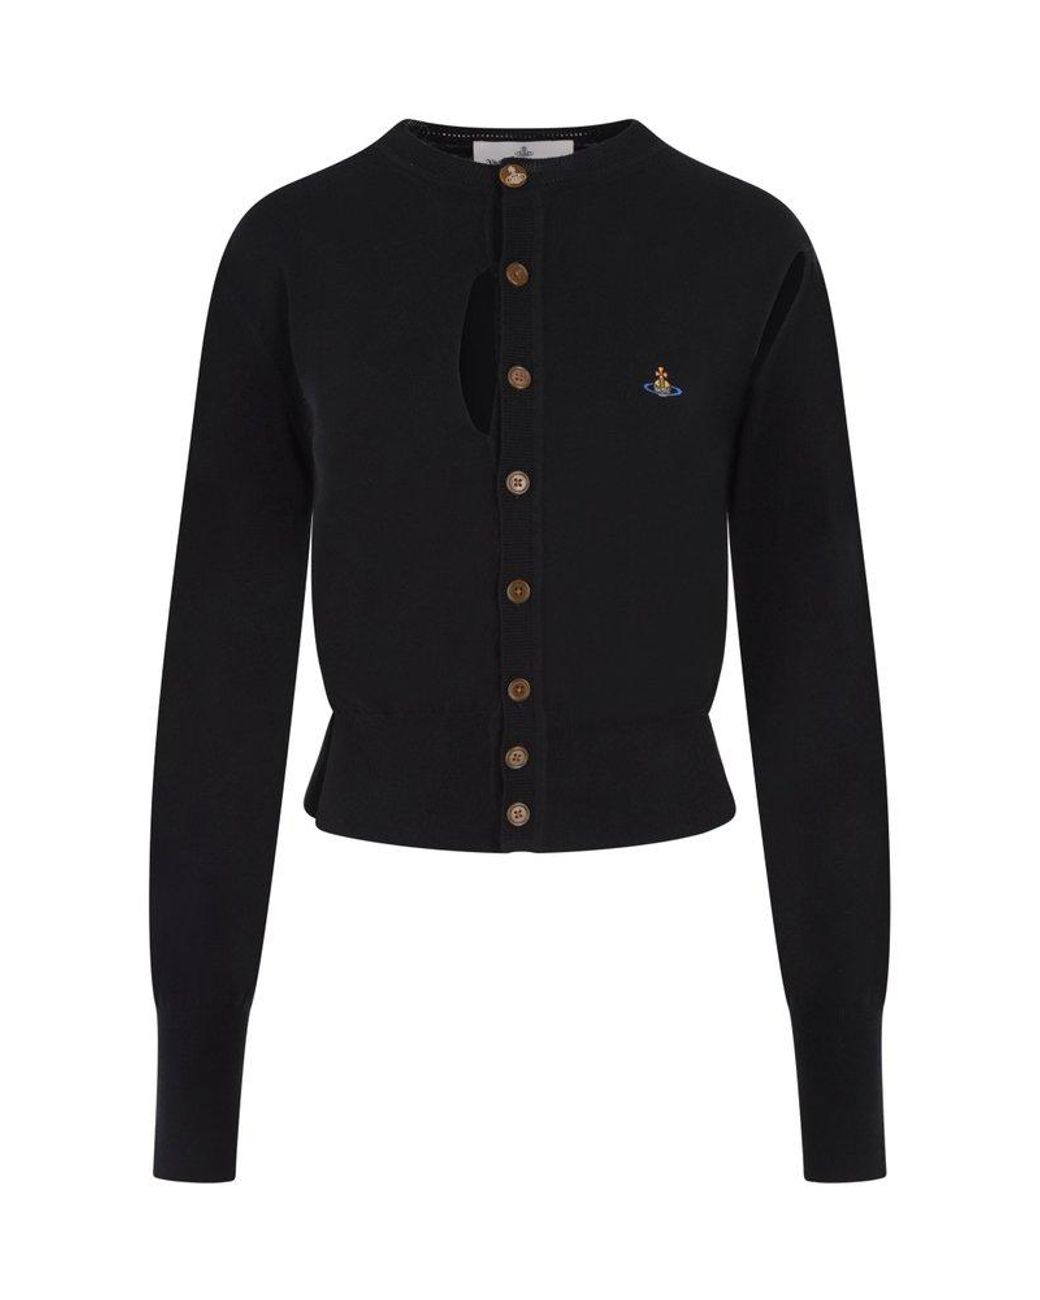 Vivienne Westwood Orb Embroidered Cut-out Cardigan in Black | Lyst